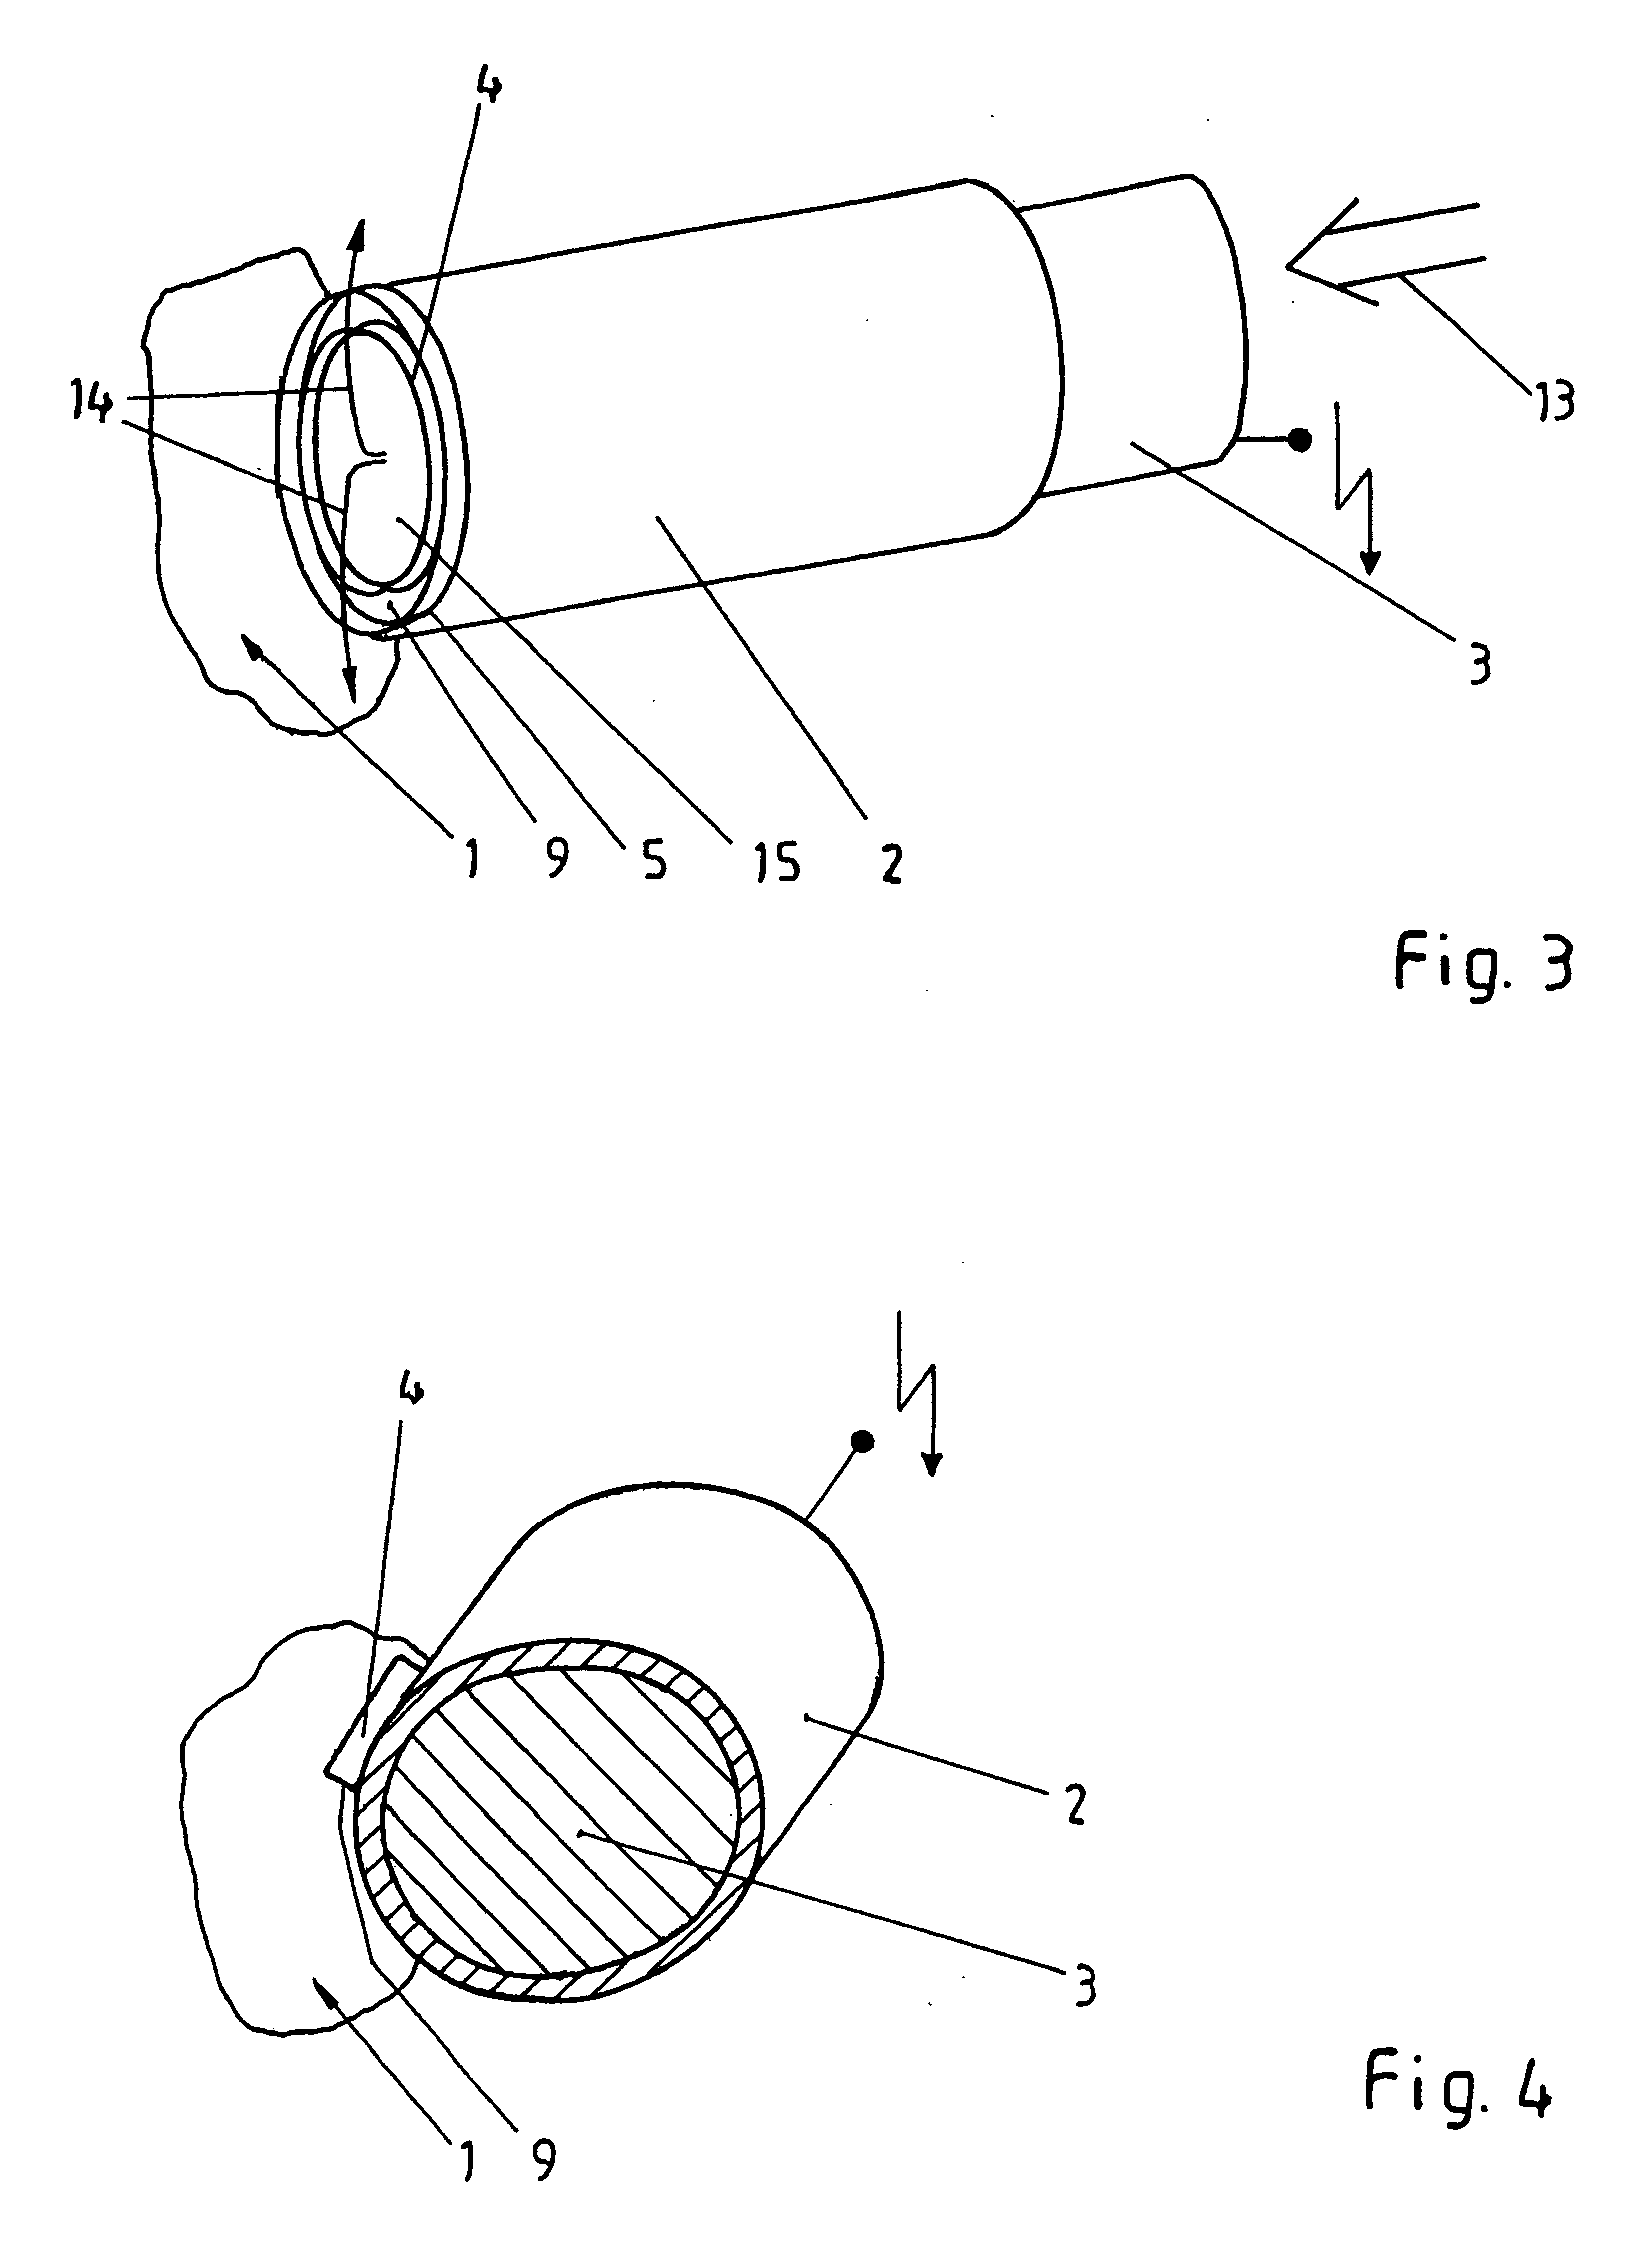 Treatment of biological material containing living cells using a plasma generated by a gas discharge